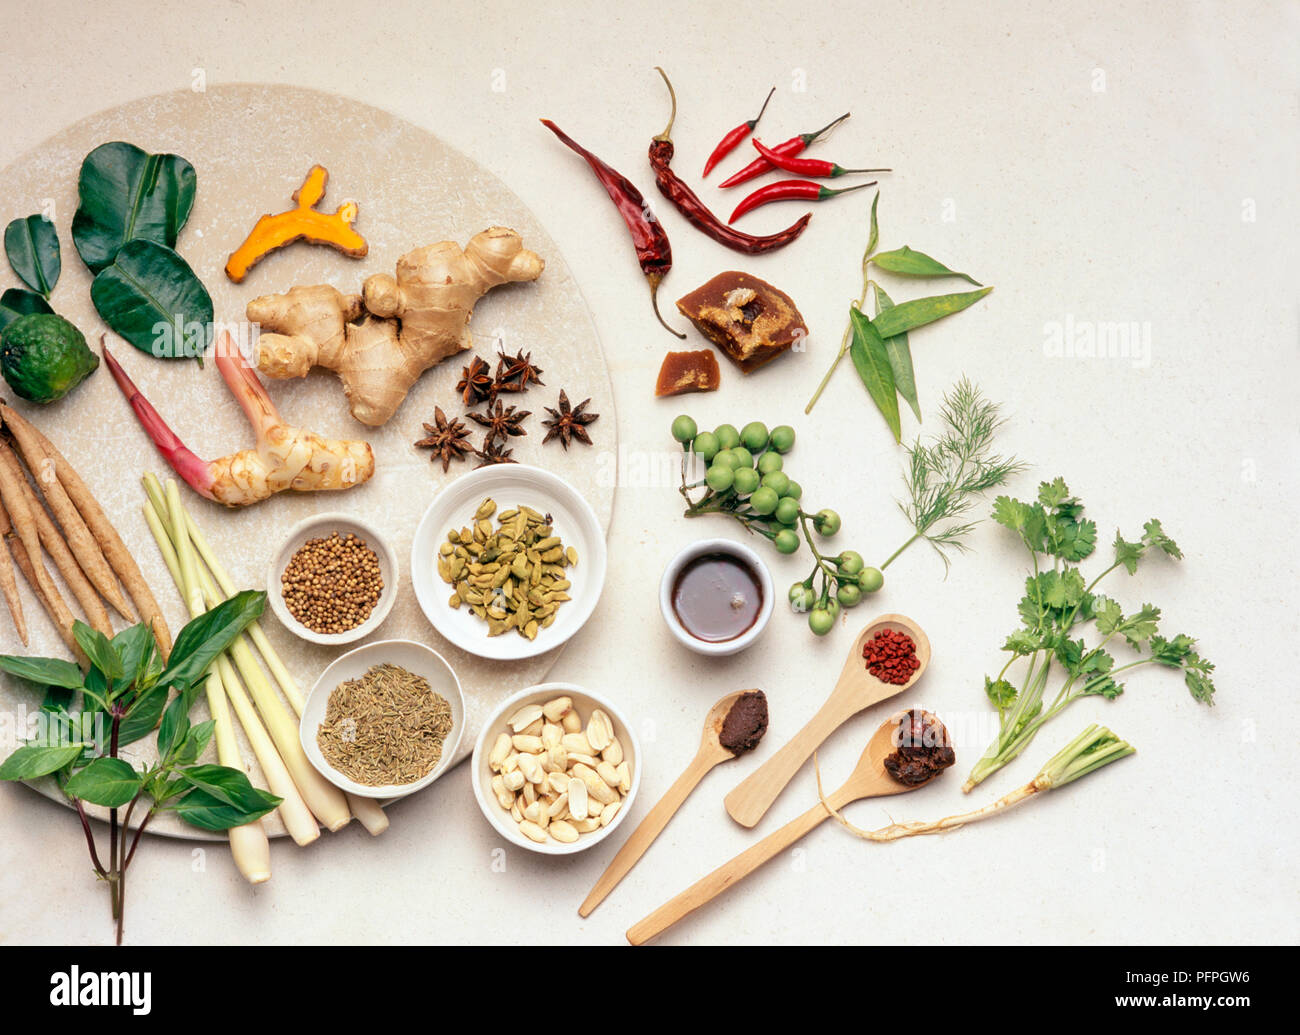 https://c8.alamy.com/comp/PFPGW6/selection-of-ingredients-typical-for-south-east-asian-cuisine-spices-seeds-herbs-including-ginger-galangal-lemon-grass-thai-basil-pea-aubergines-chilli-peppers-PFPGW6.jpg